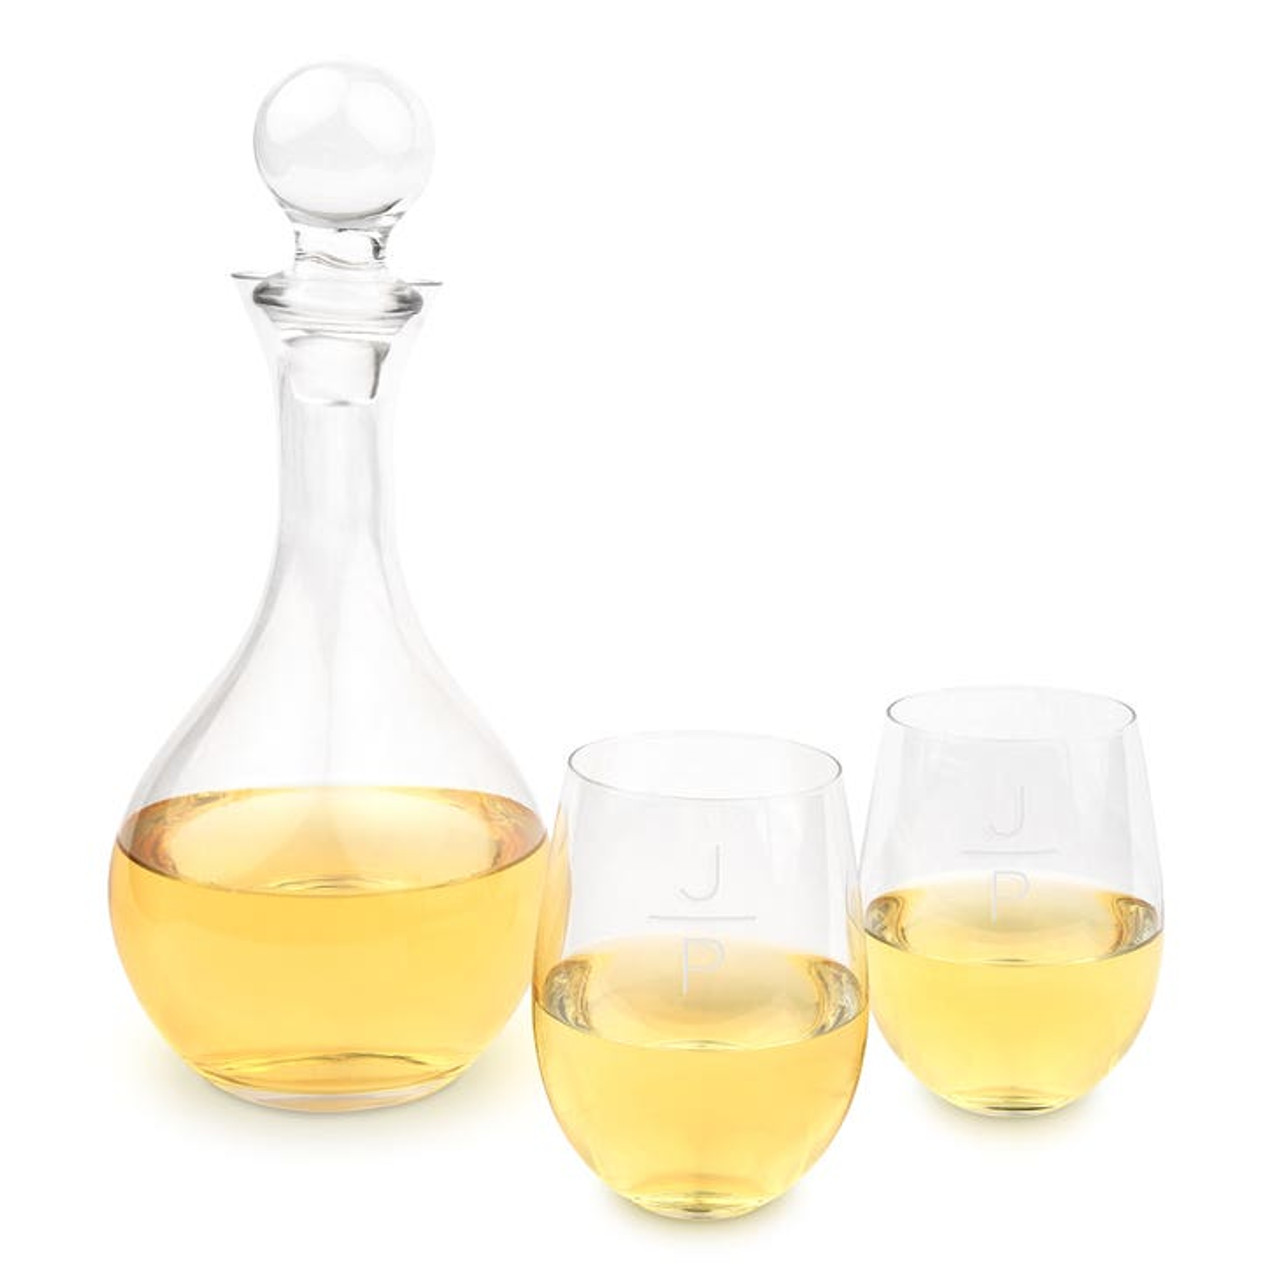 https://cdn11.bigcommerce.com/s-h9yhhjf2jt/images/stencil/1280x1280/products/1537/11057/5915-008945001-wa_engraved-glass-decanter-gift-set-with-wine-glasses-stacked-monogram__43581.1686789895.jpg?c=2